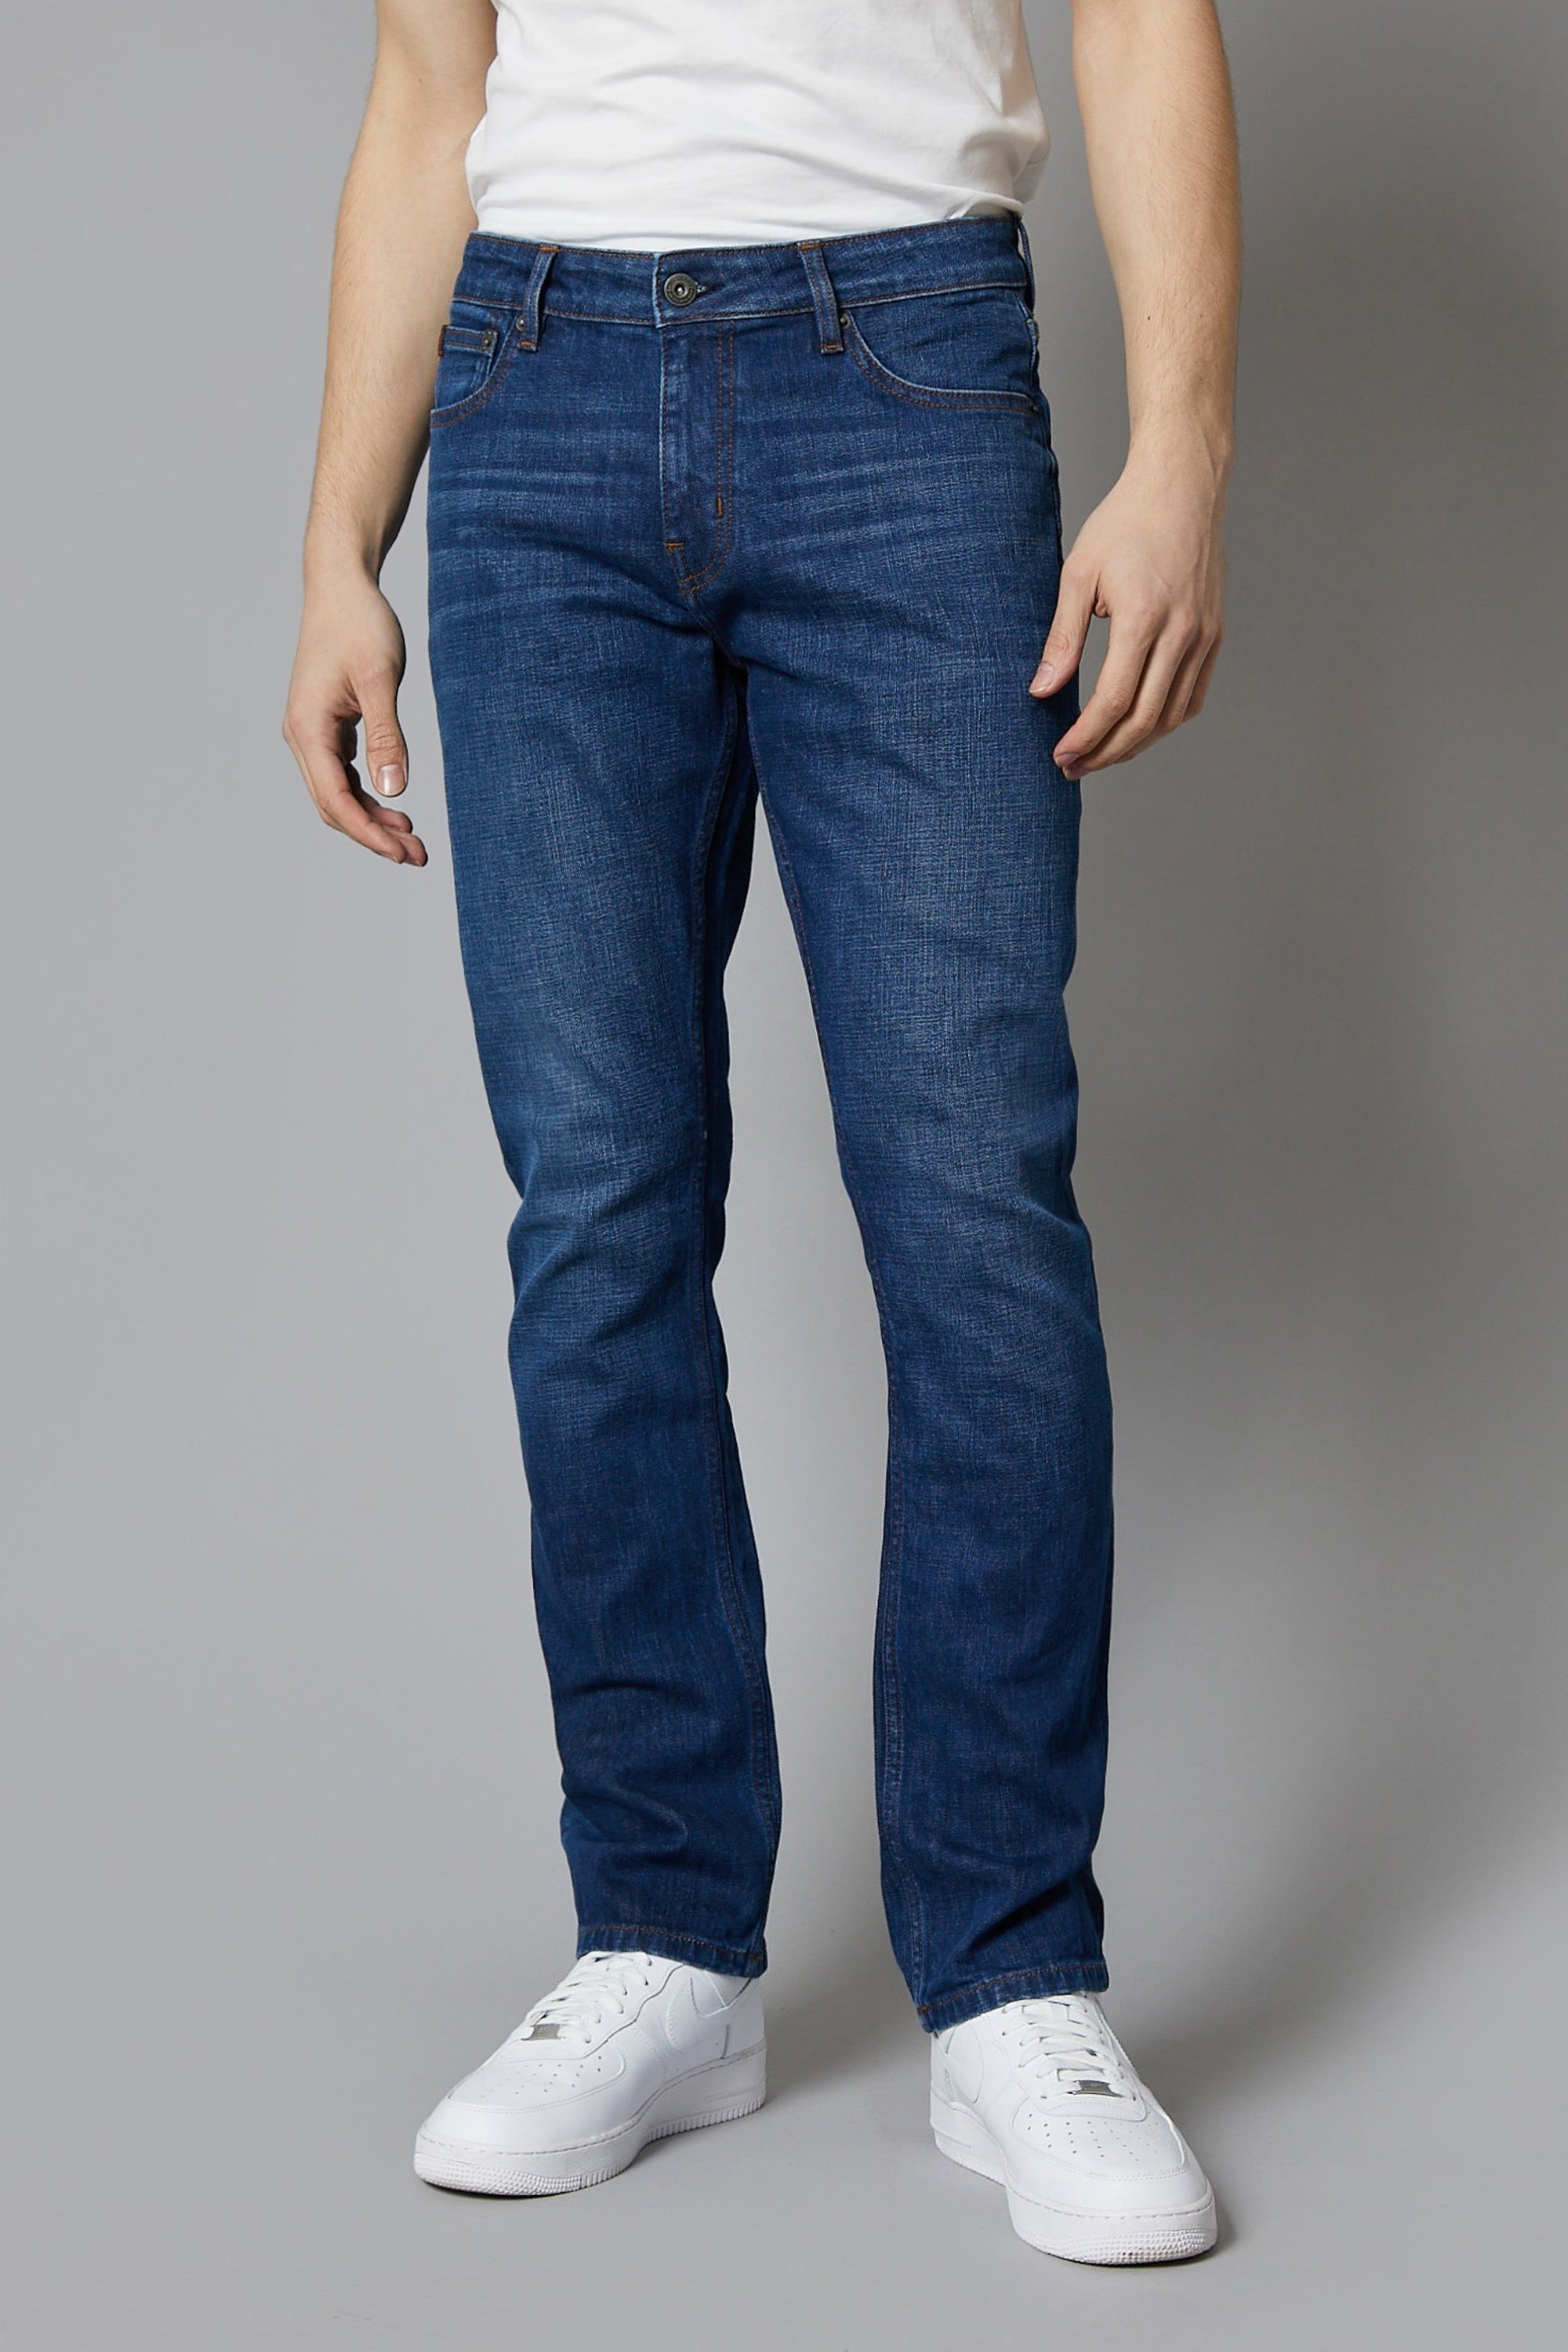 Navy Blue Jeans - Buy Trendy Navy Blue Jeans Online in India | Myntra